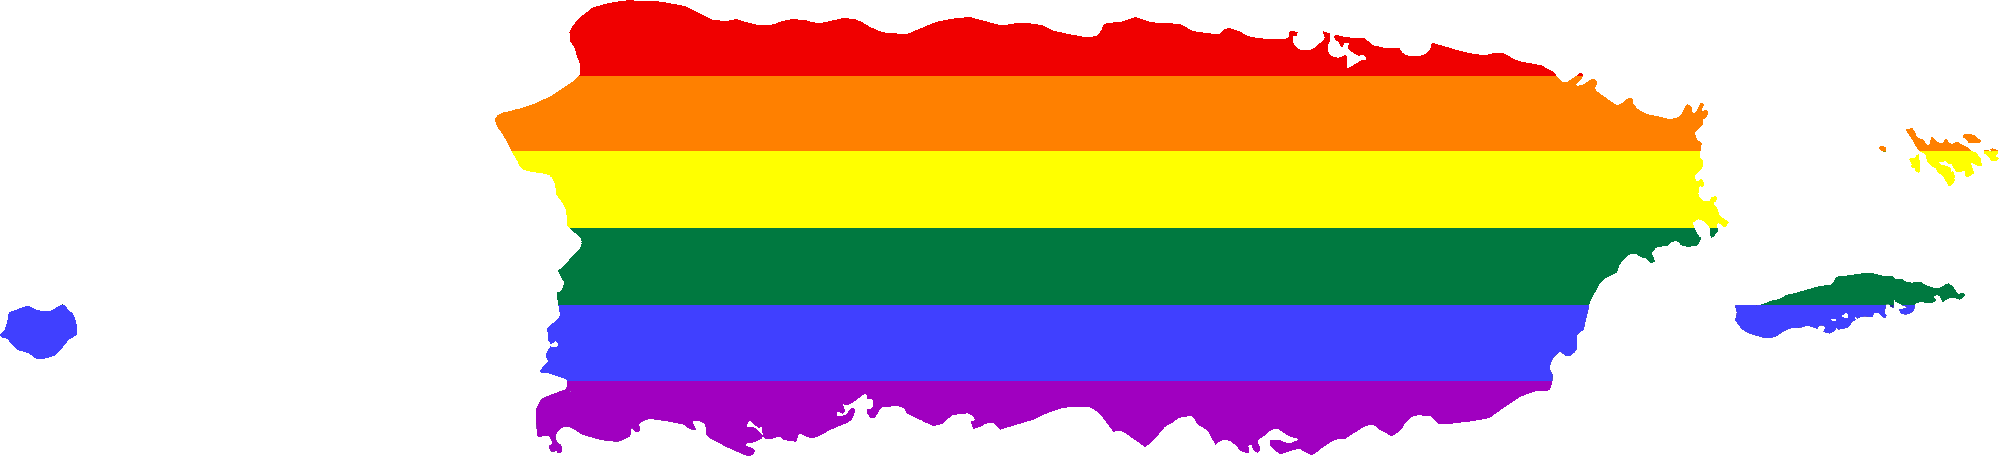 LGBT Flag map of Puerto Rico.png. 